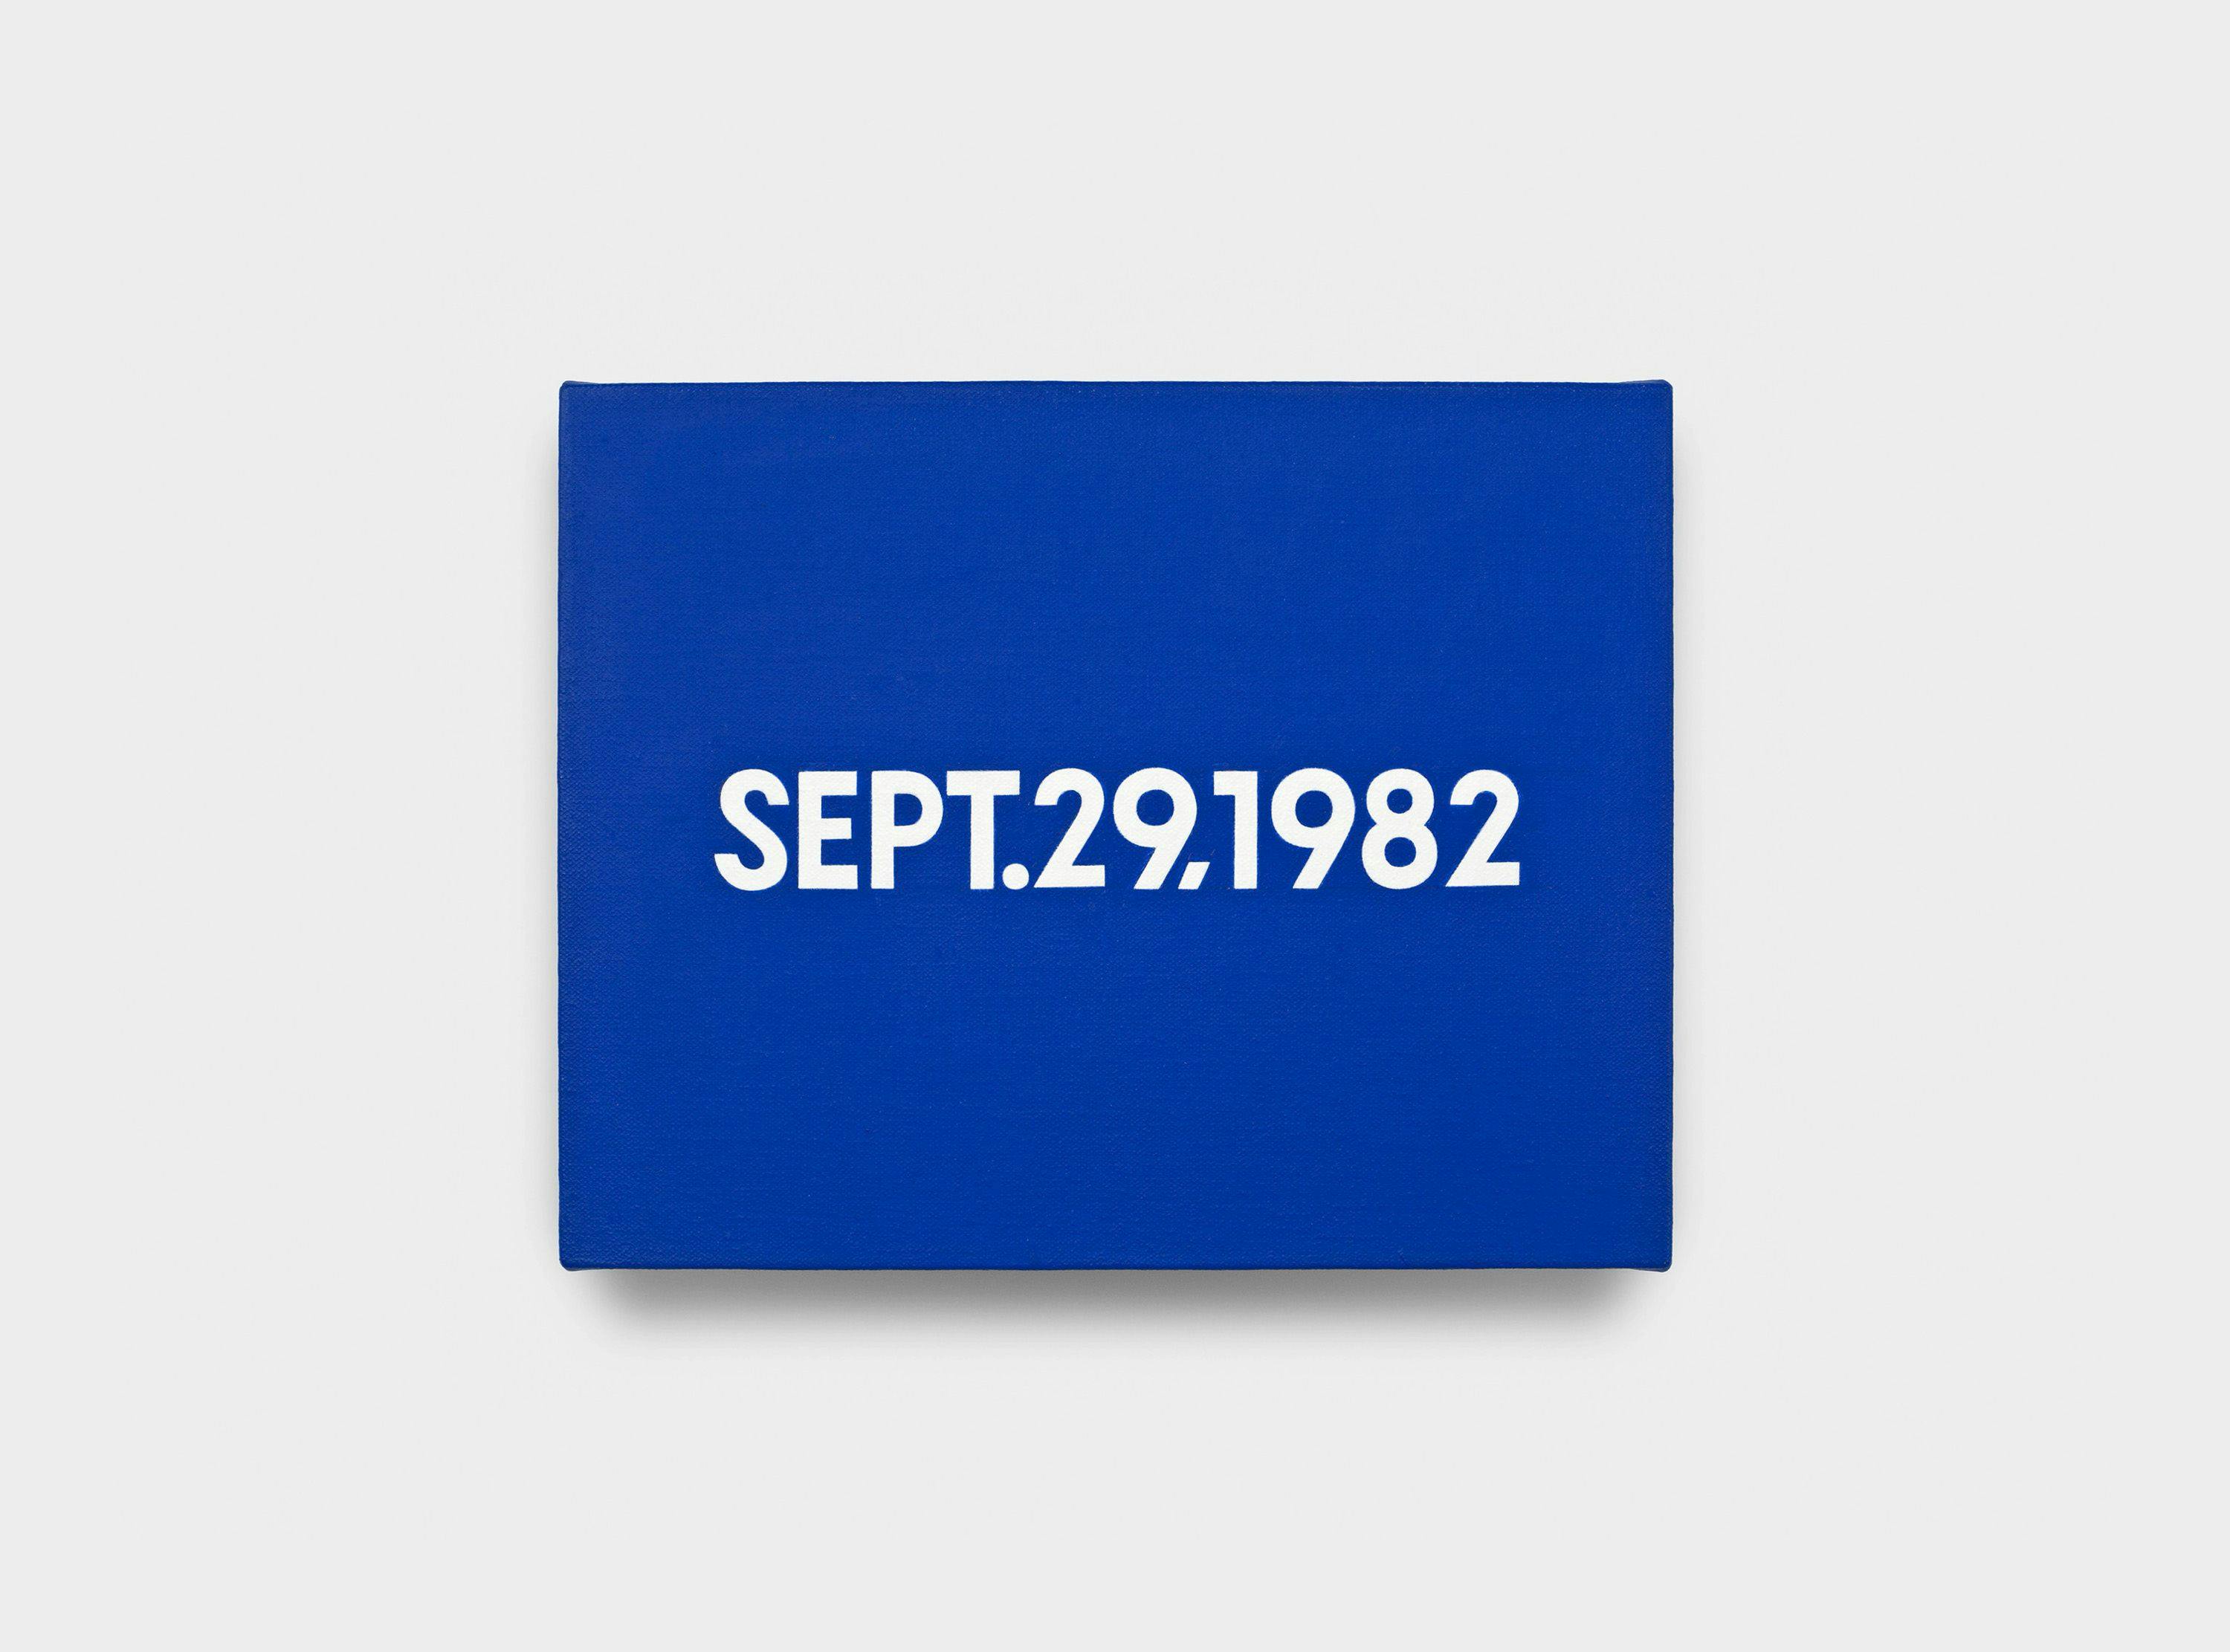 A painting by On Kawara, titled SEPT. 29, 1982, dated 1982.